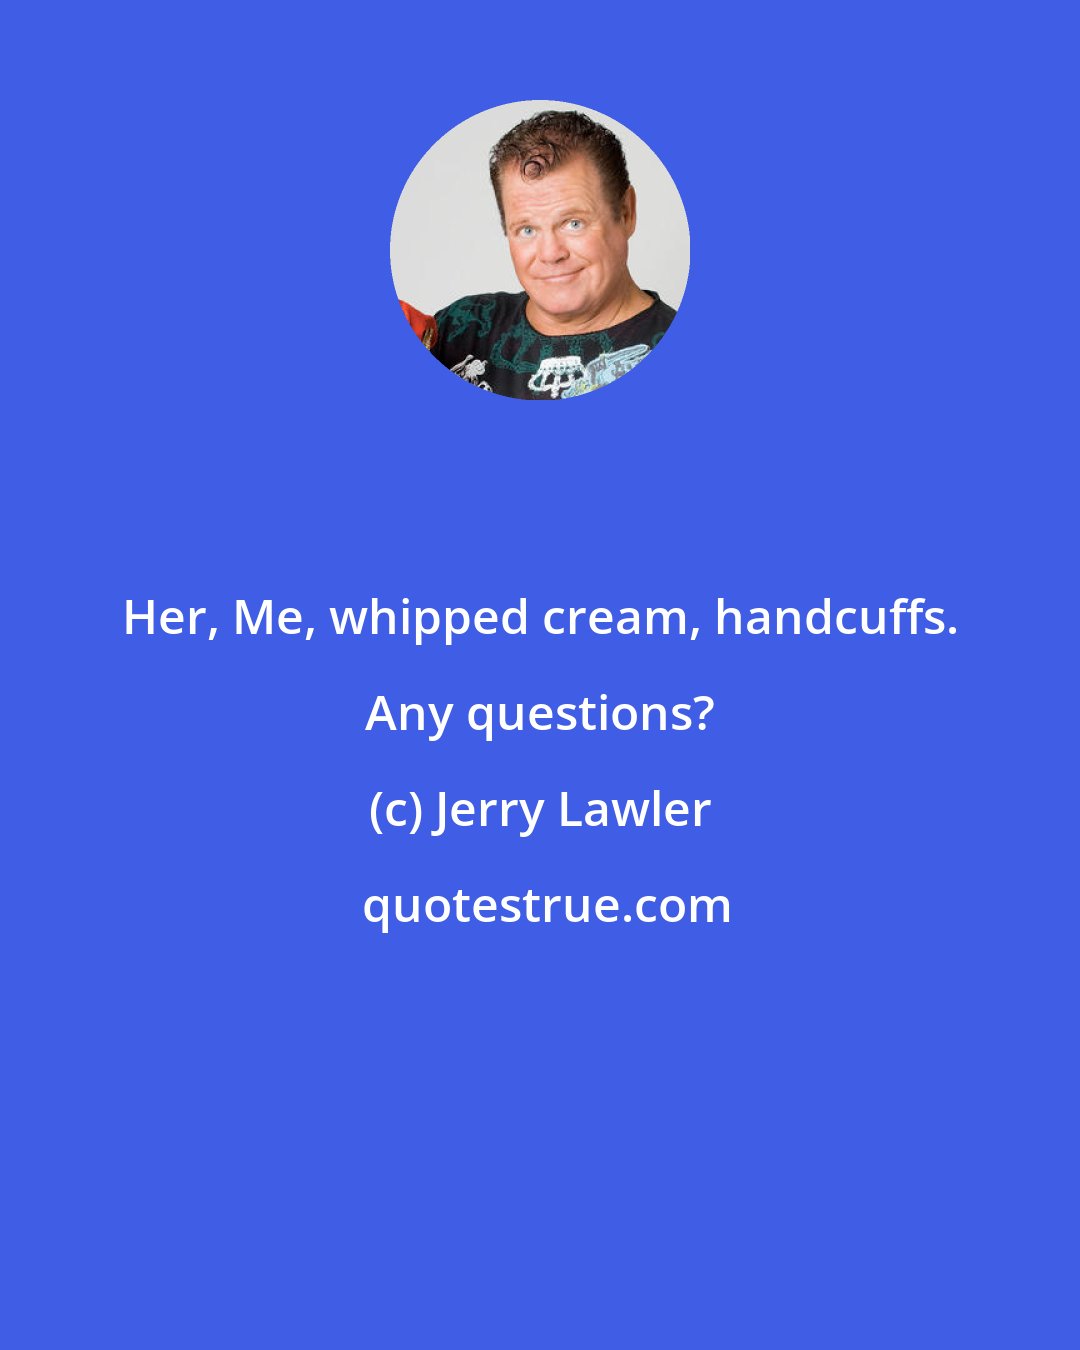 Jerry Lawler: Her, Me, whipped cream, handcuffs. Any questions?